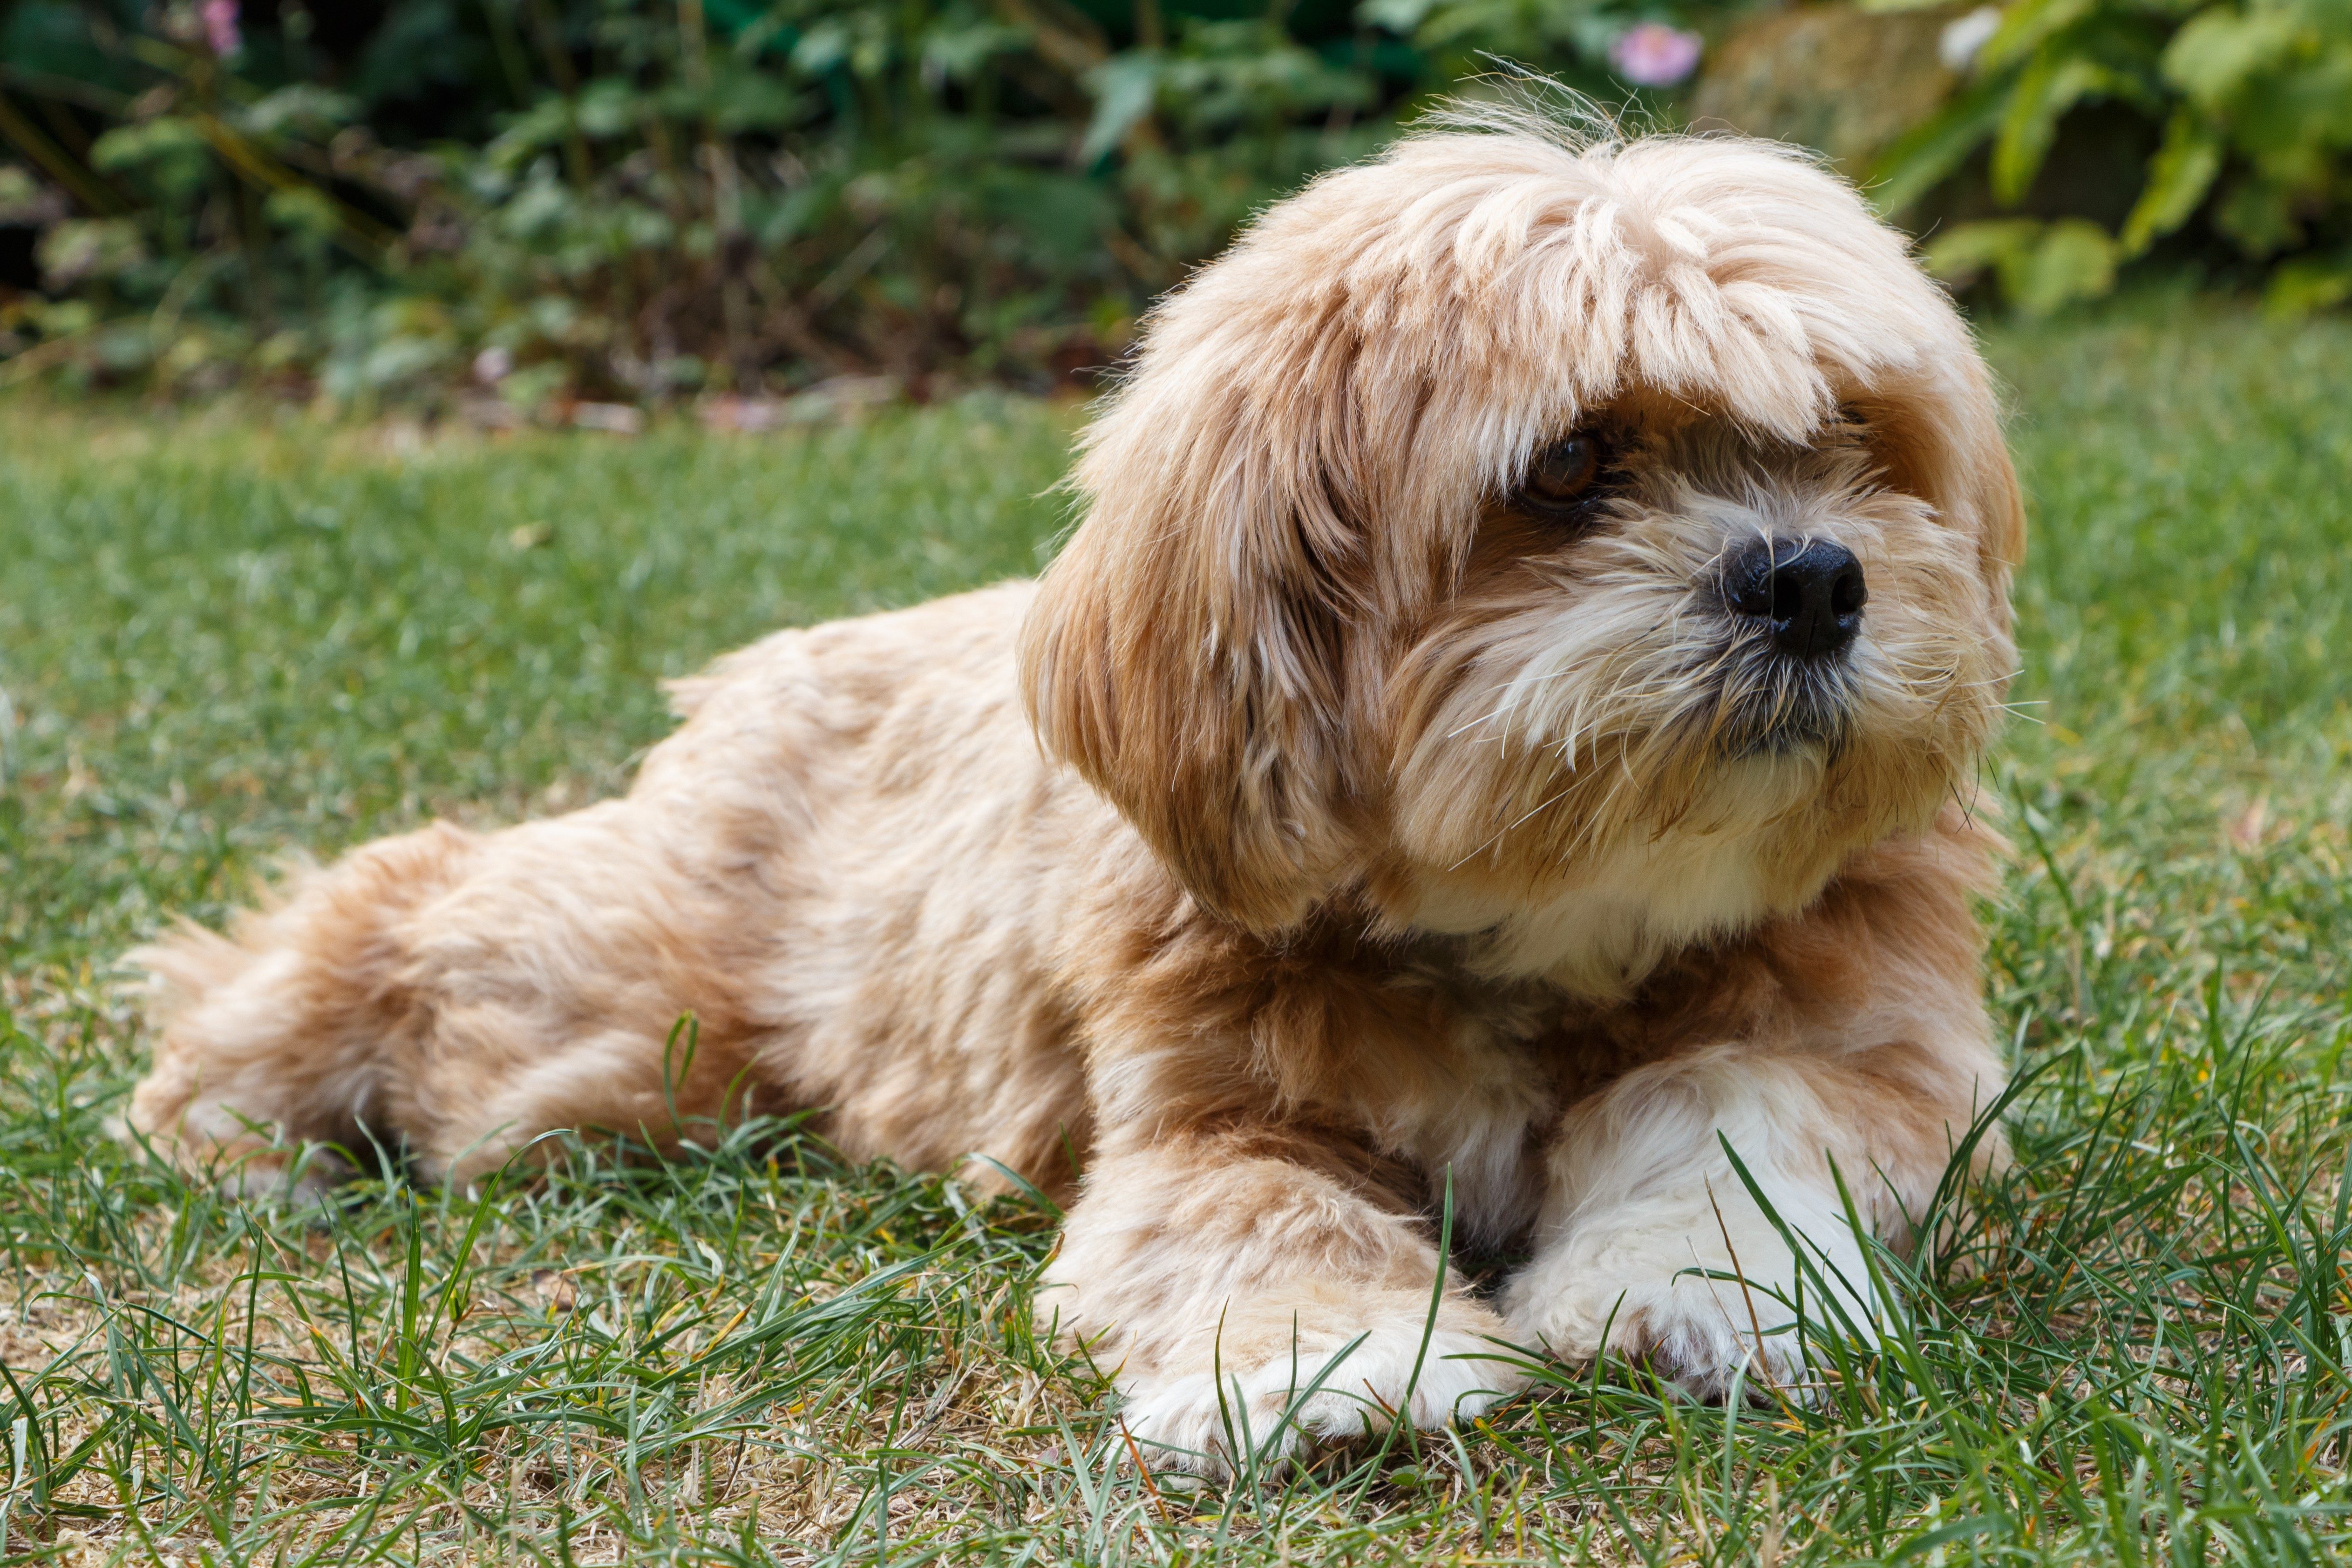 Dogs That Don't Shed (That Much): Hypoallergenic Dogs 